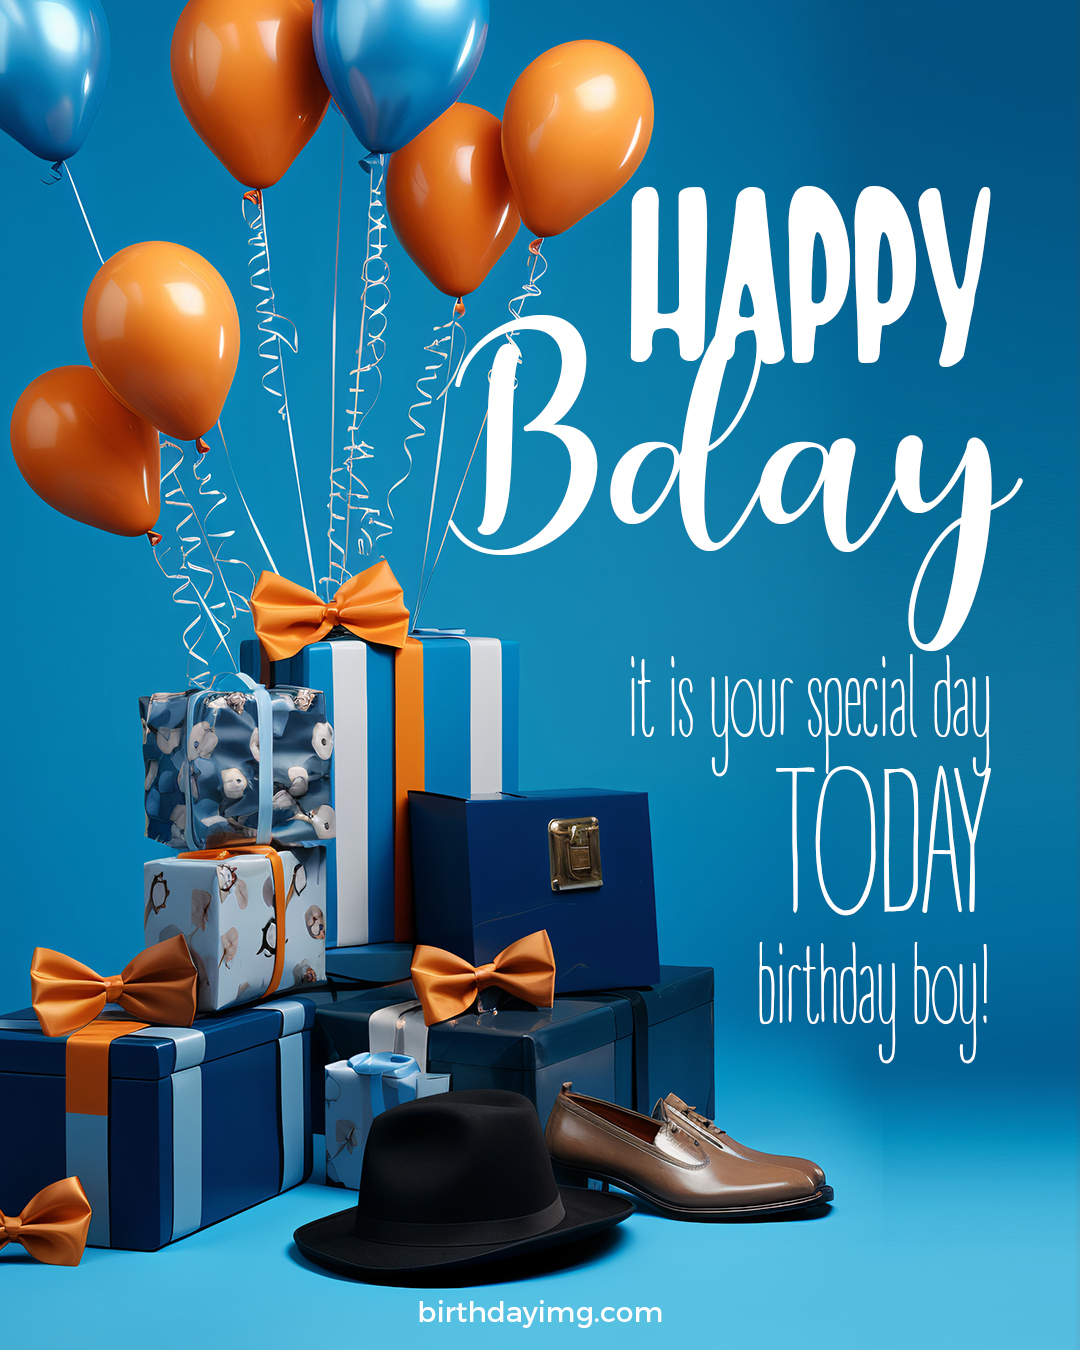 Free Happy Birthday Wishes and Images for Guy - birthdayimg.com